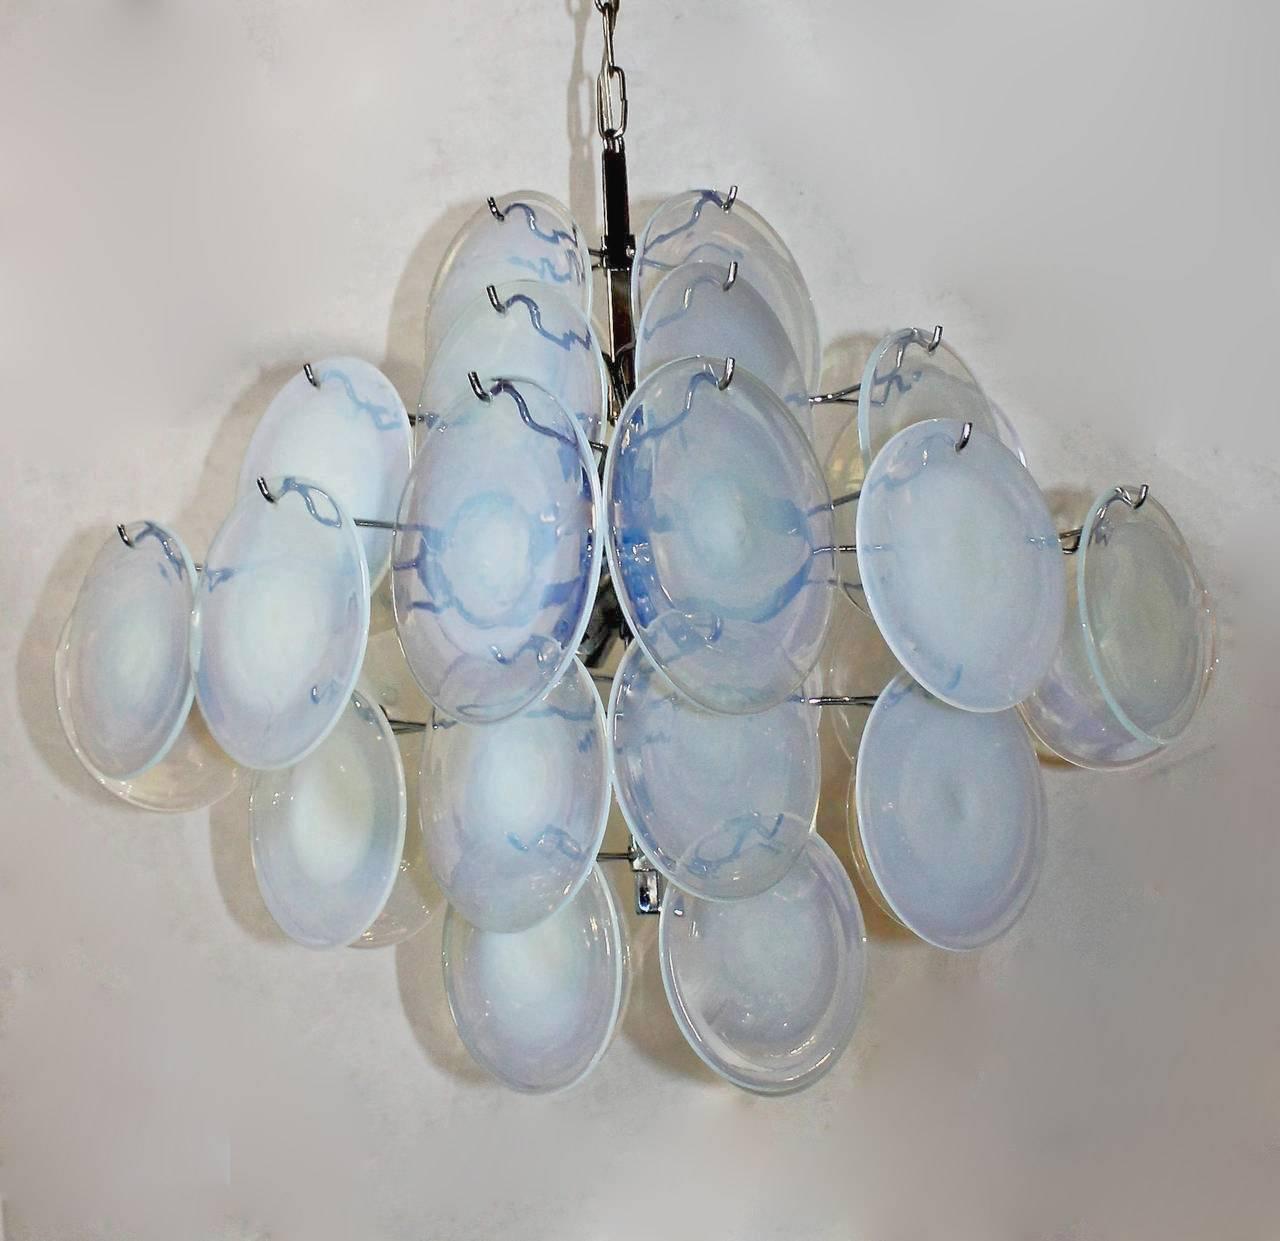 Italian Murano chandelier composed of handblown opalescent glass discs by Gino Vistosi. Chrome-plated metal frame uses 8 - 40 watt max candelabra base bulbs. Rewired. Overall height with chain and ceiling cap 42